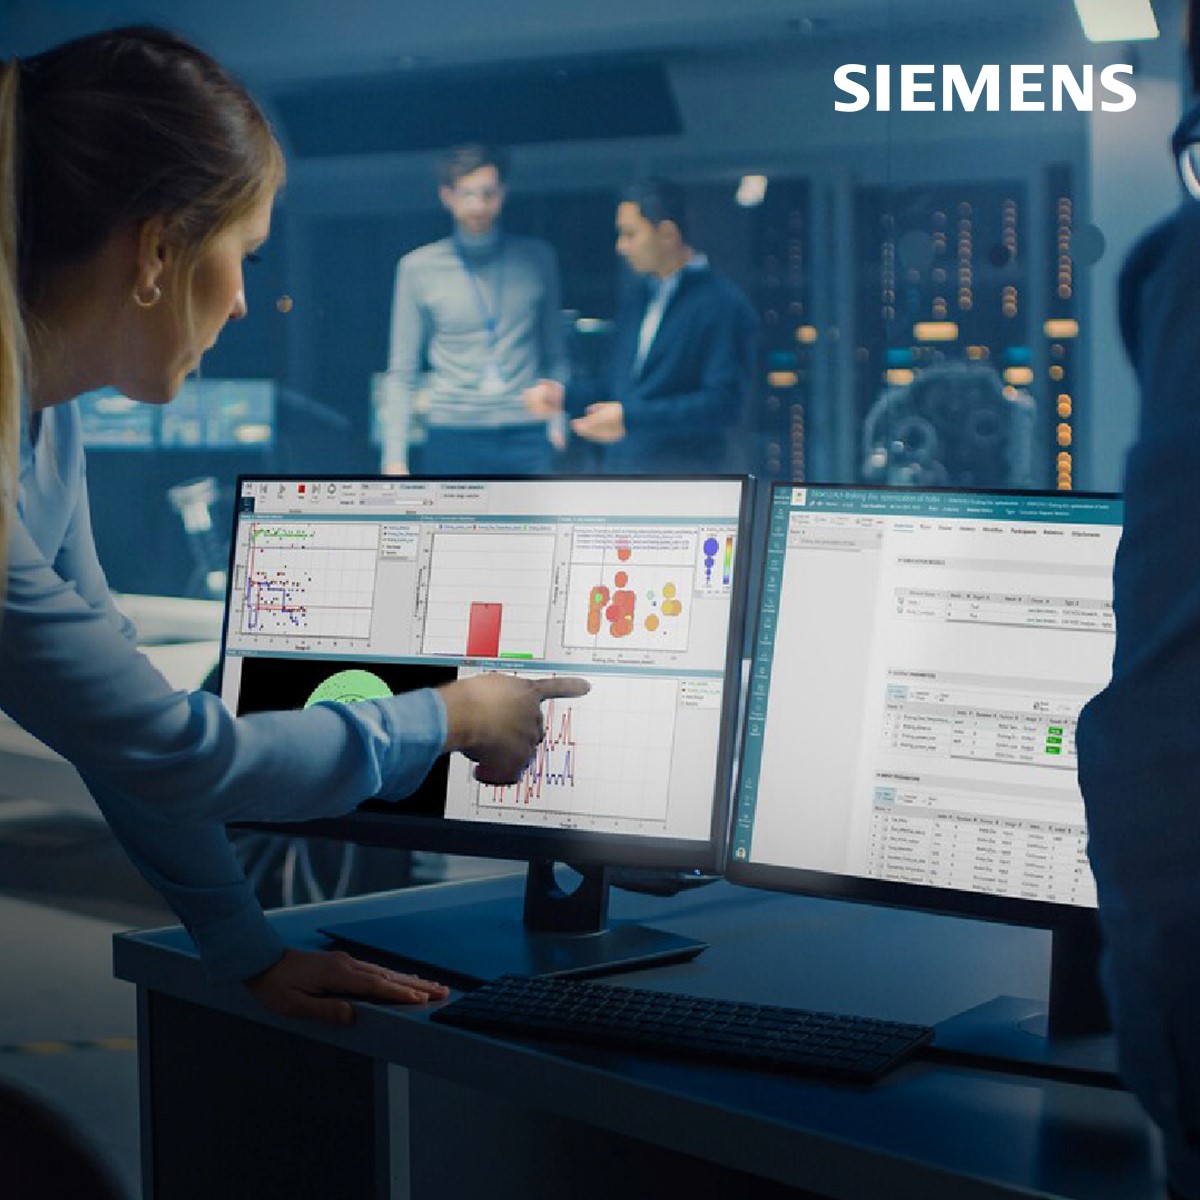 Struggling to keep up with the complexity of #SoftwareDefinedVehicles (SDVs)? Multi-domain simulation can help. Learn how to optimize performance and catch issues early: sie.ag/5L3Ejm